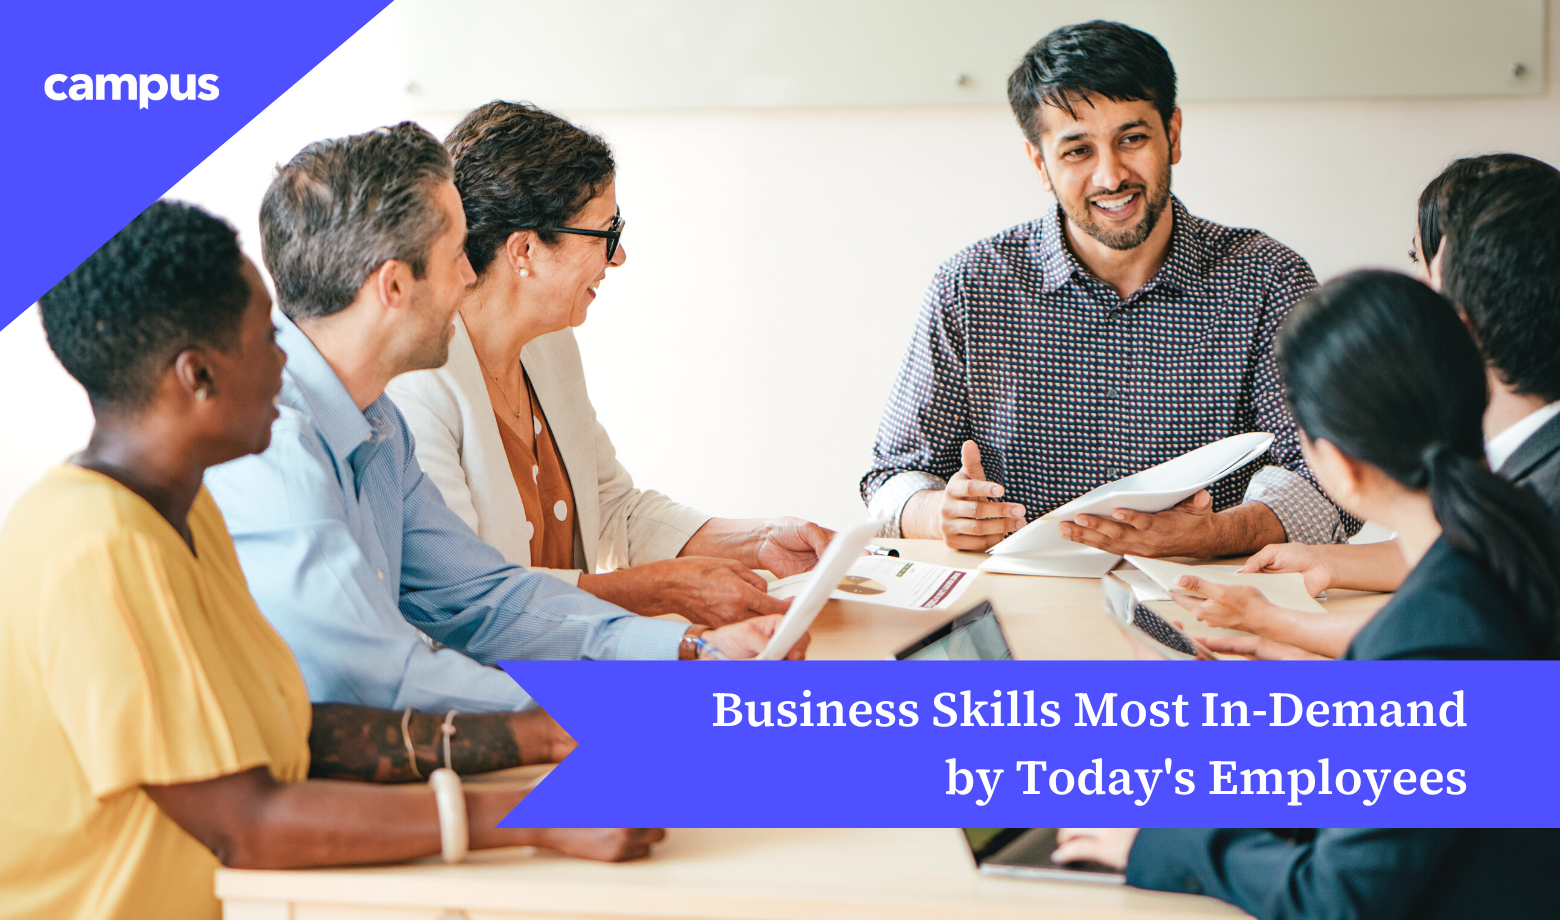 5 Business Administration Skills Needed by Today's Employers